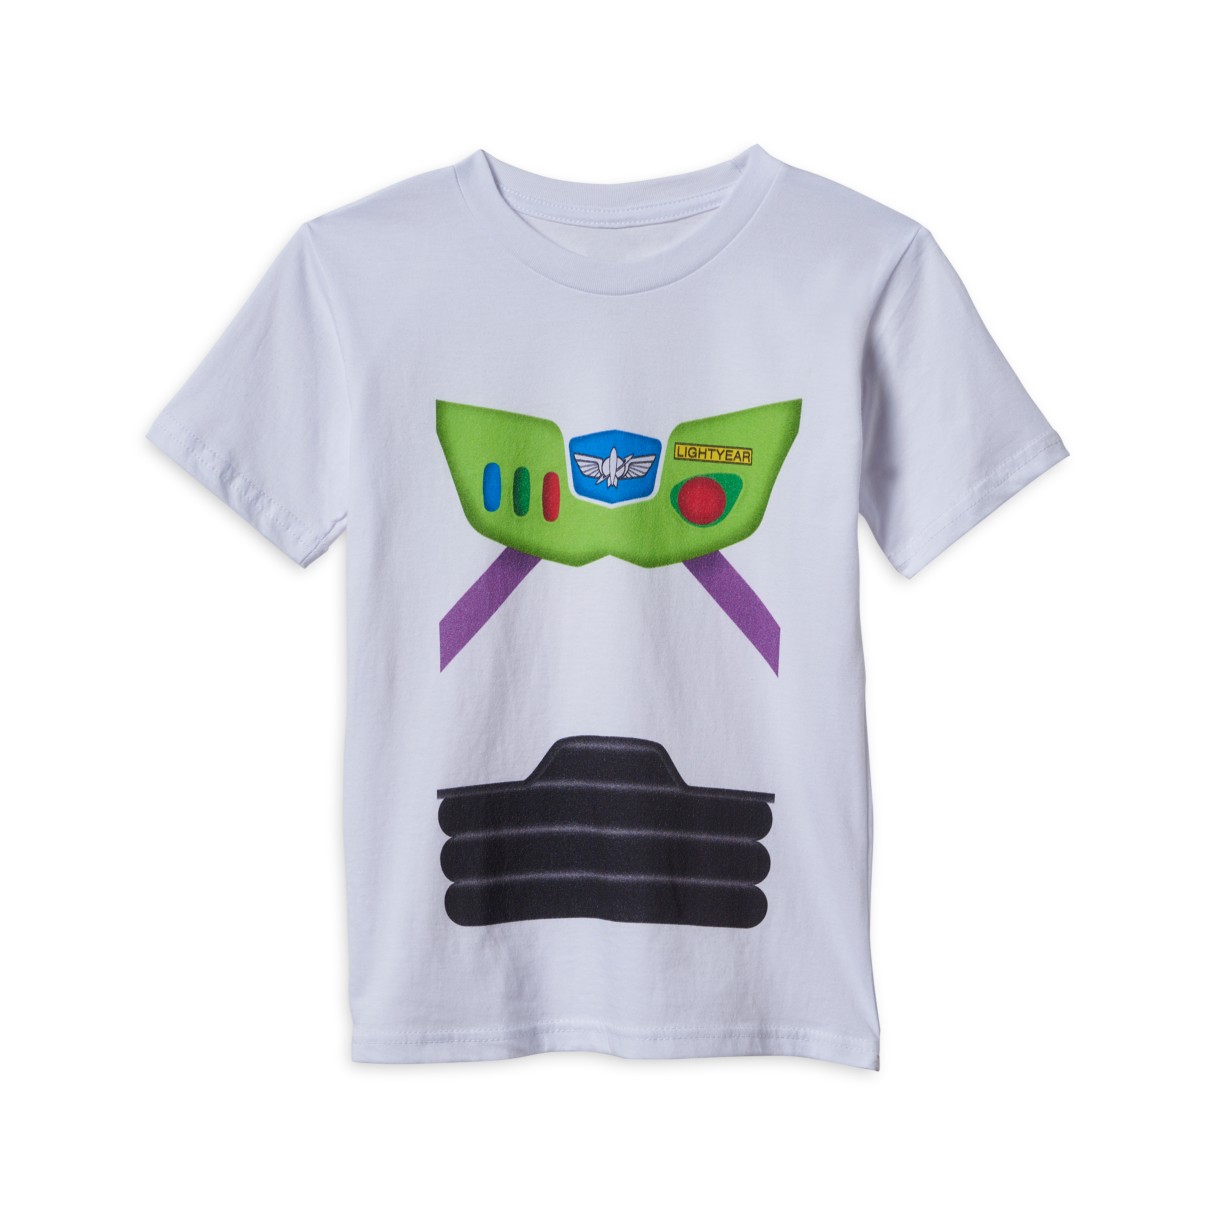 Buzz Lightyear Costume T-Shirt for Kids – Toy Story